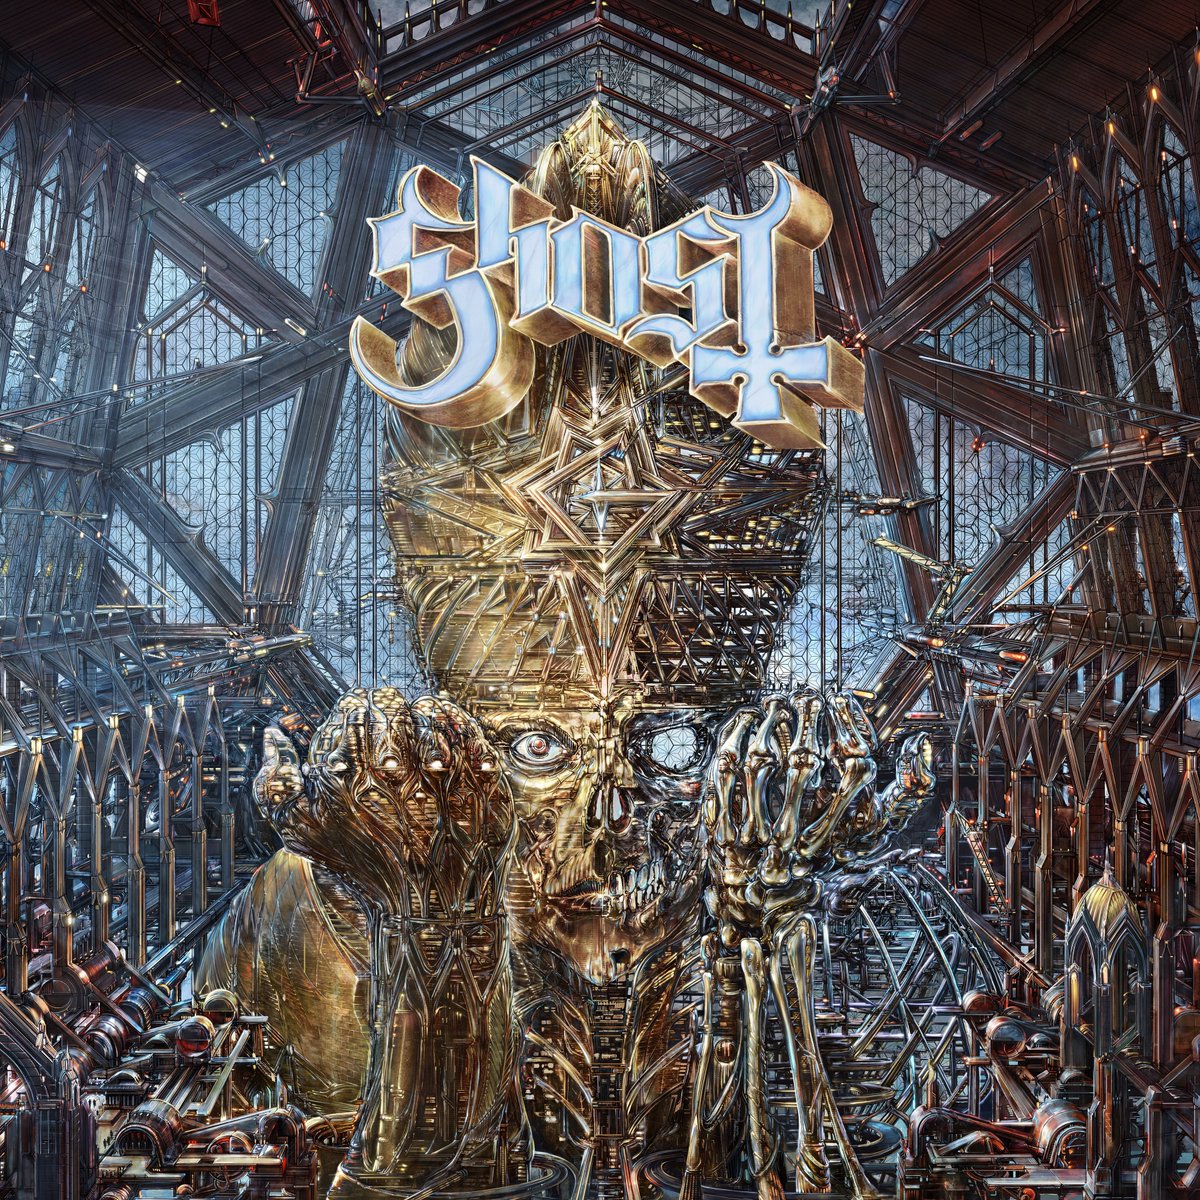 [MESSAGE FROM THE CLERGY]

We wish to inform you Ghost's new album IMPERA is coming March 11th. Pre-order & pre-save it now: found.ee/Ghost_IMPERA